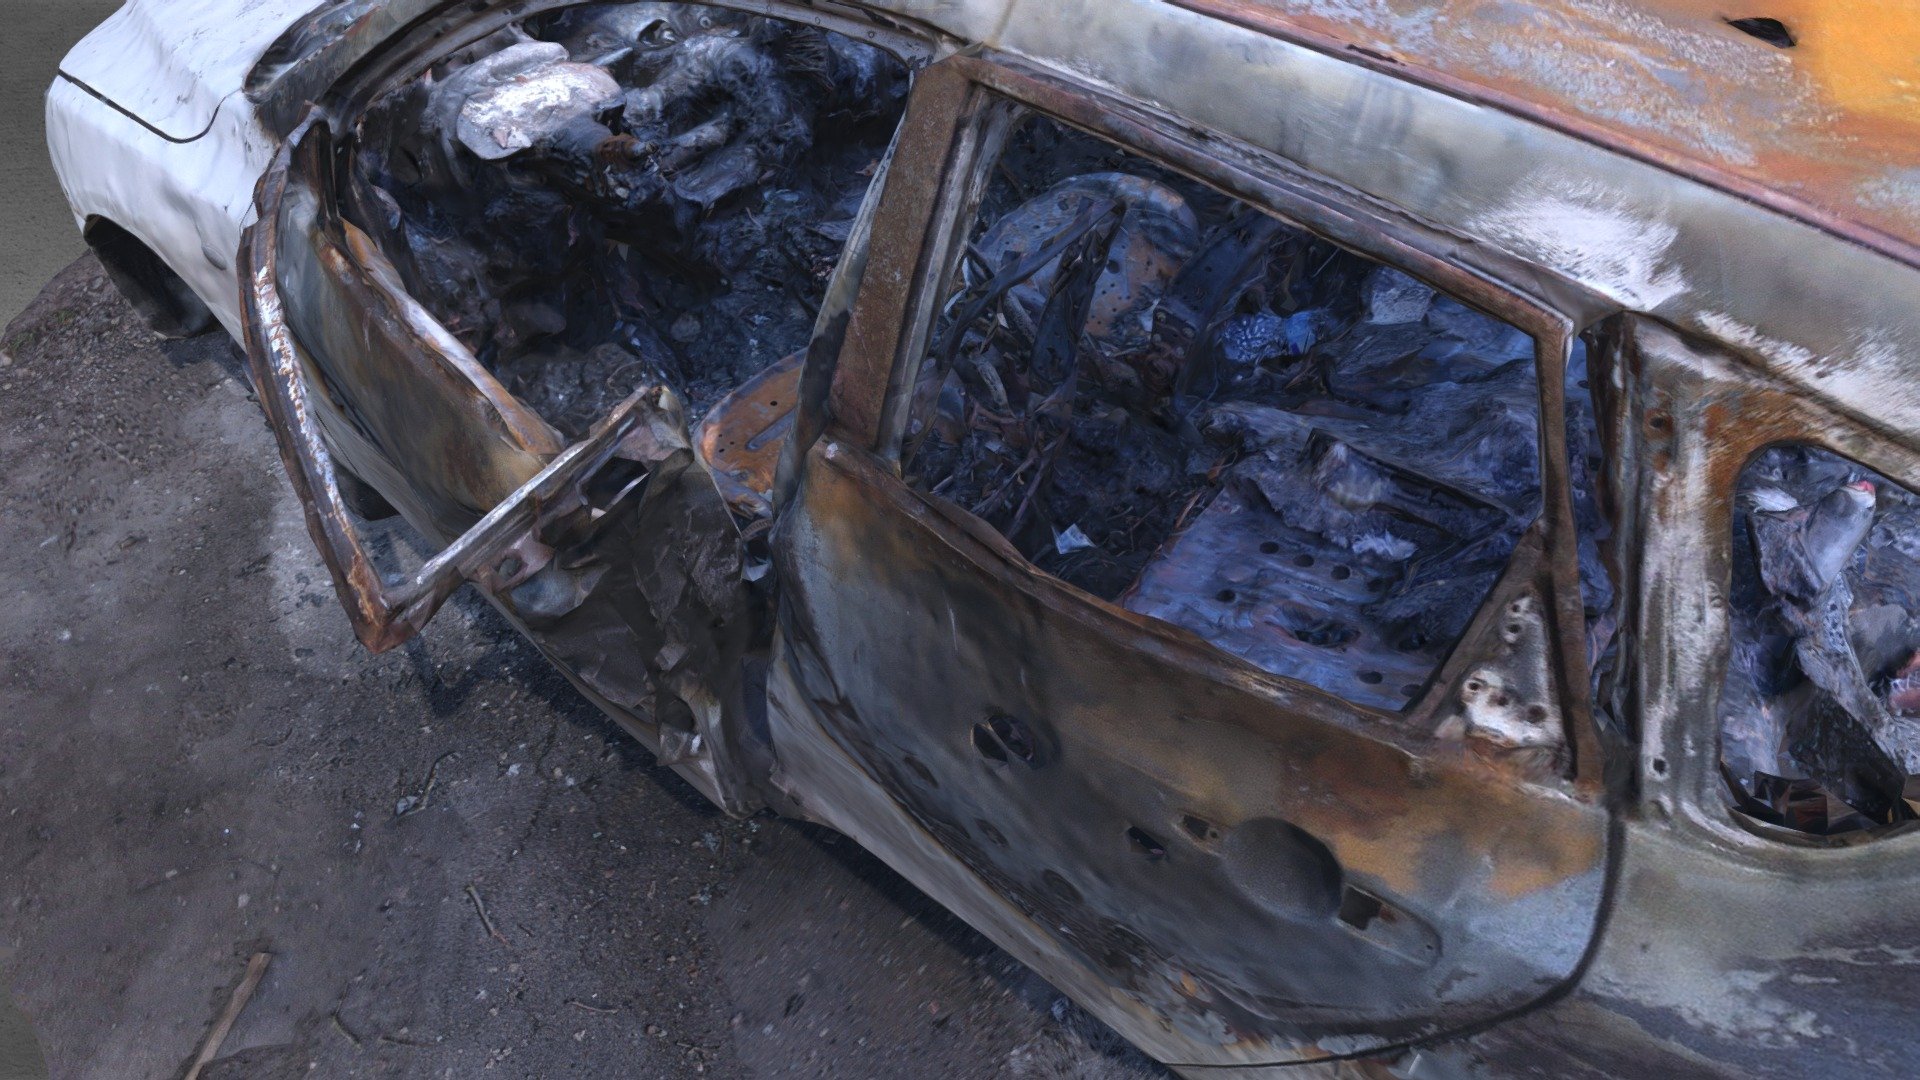 A burned automobile wreck.
Car color: white.
Front part is somewhat ok, all else has been burnt. 
With normal map 3d model